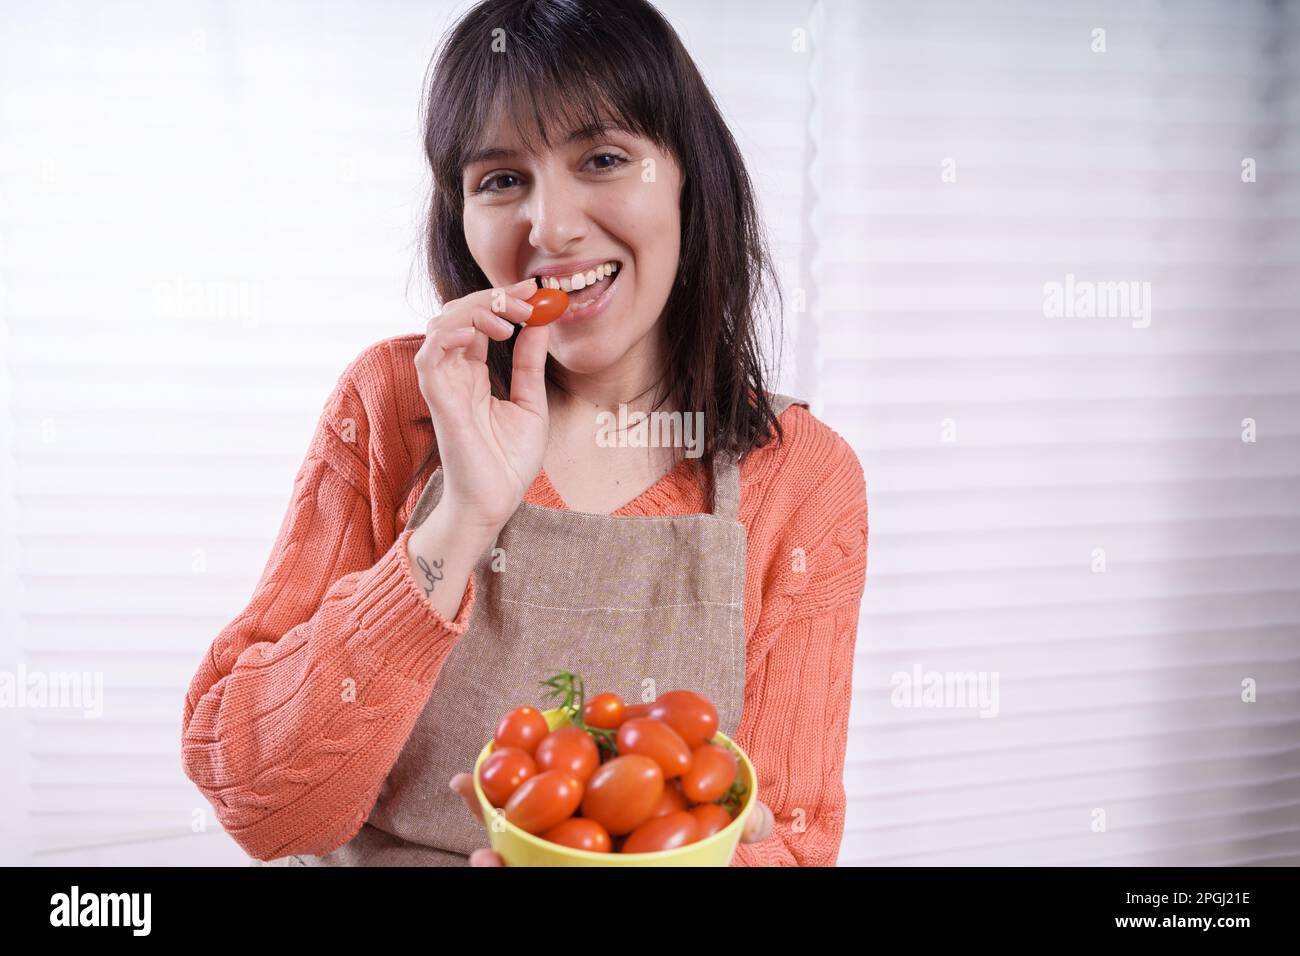 A Caucasian brunette housewife with long hair in an orange sweater and sand-colored apron bites a cherry tomato, holding a bowl by a backlit window, e Stock Photo